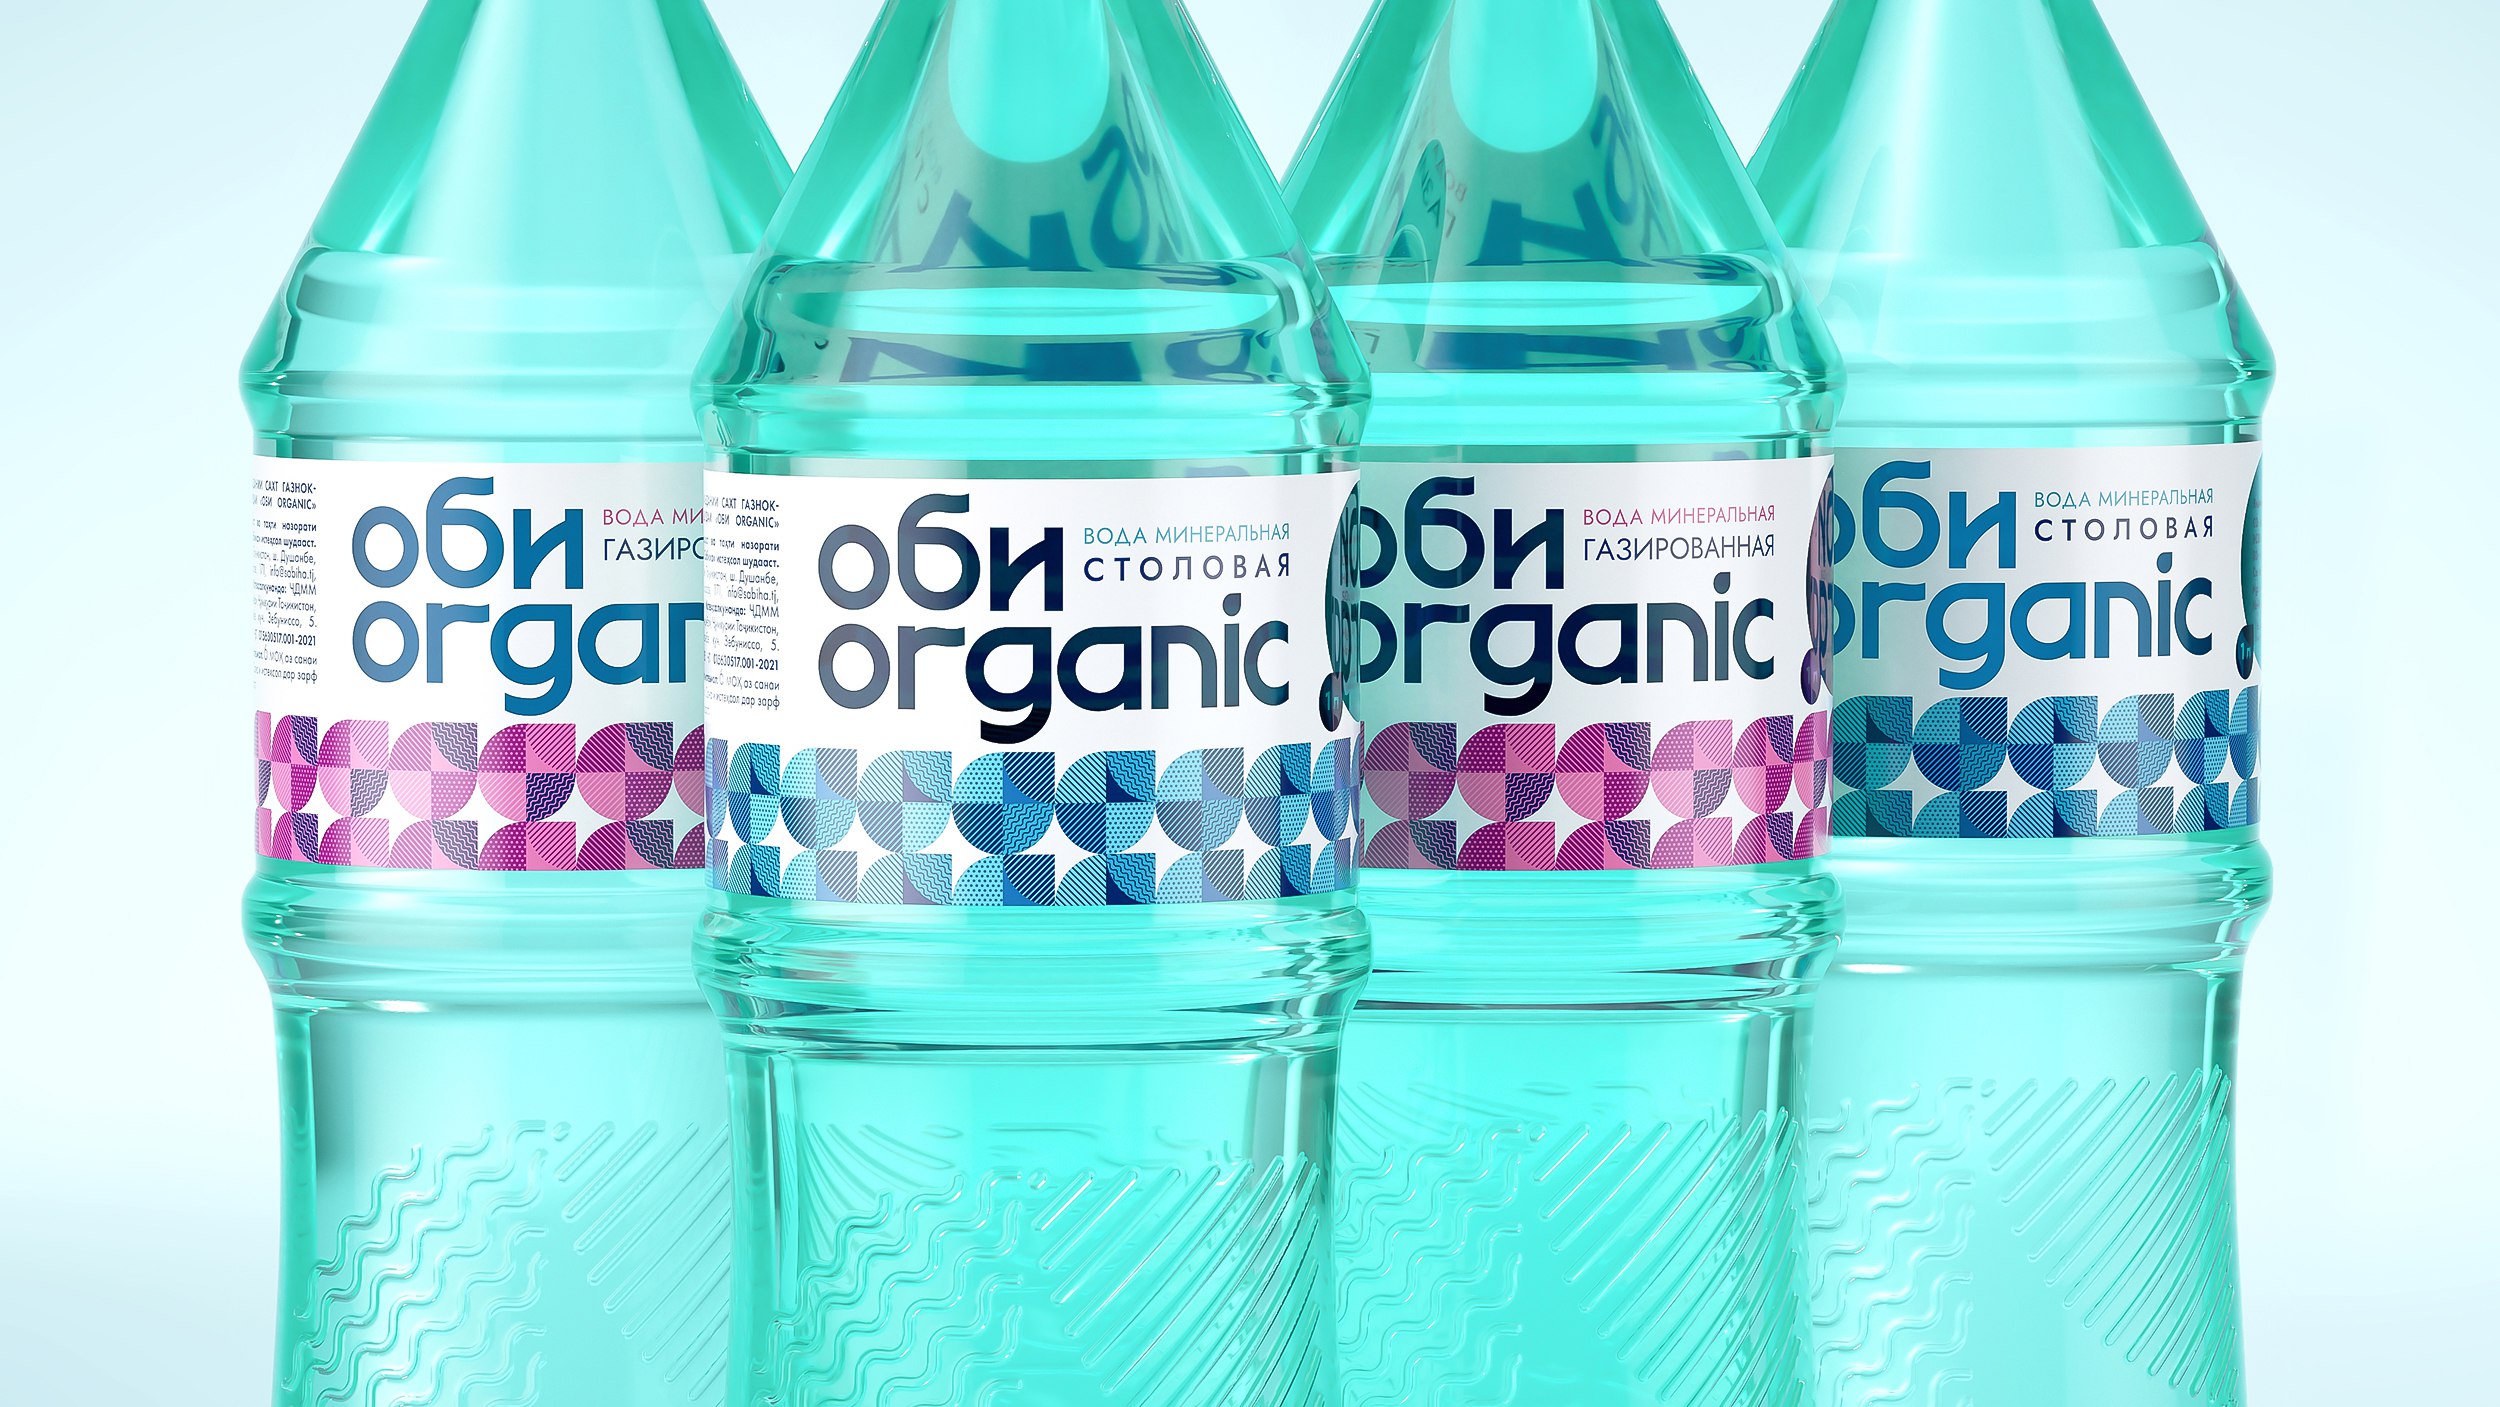 “Obi Organic”. A Modern Look on Mineral Water Packaging Design